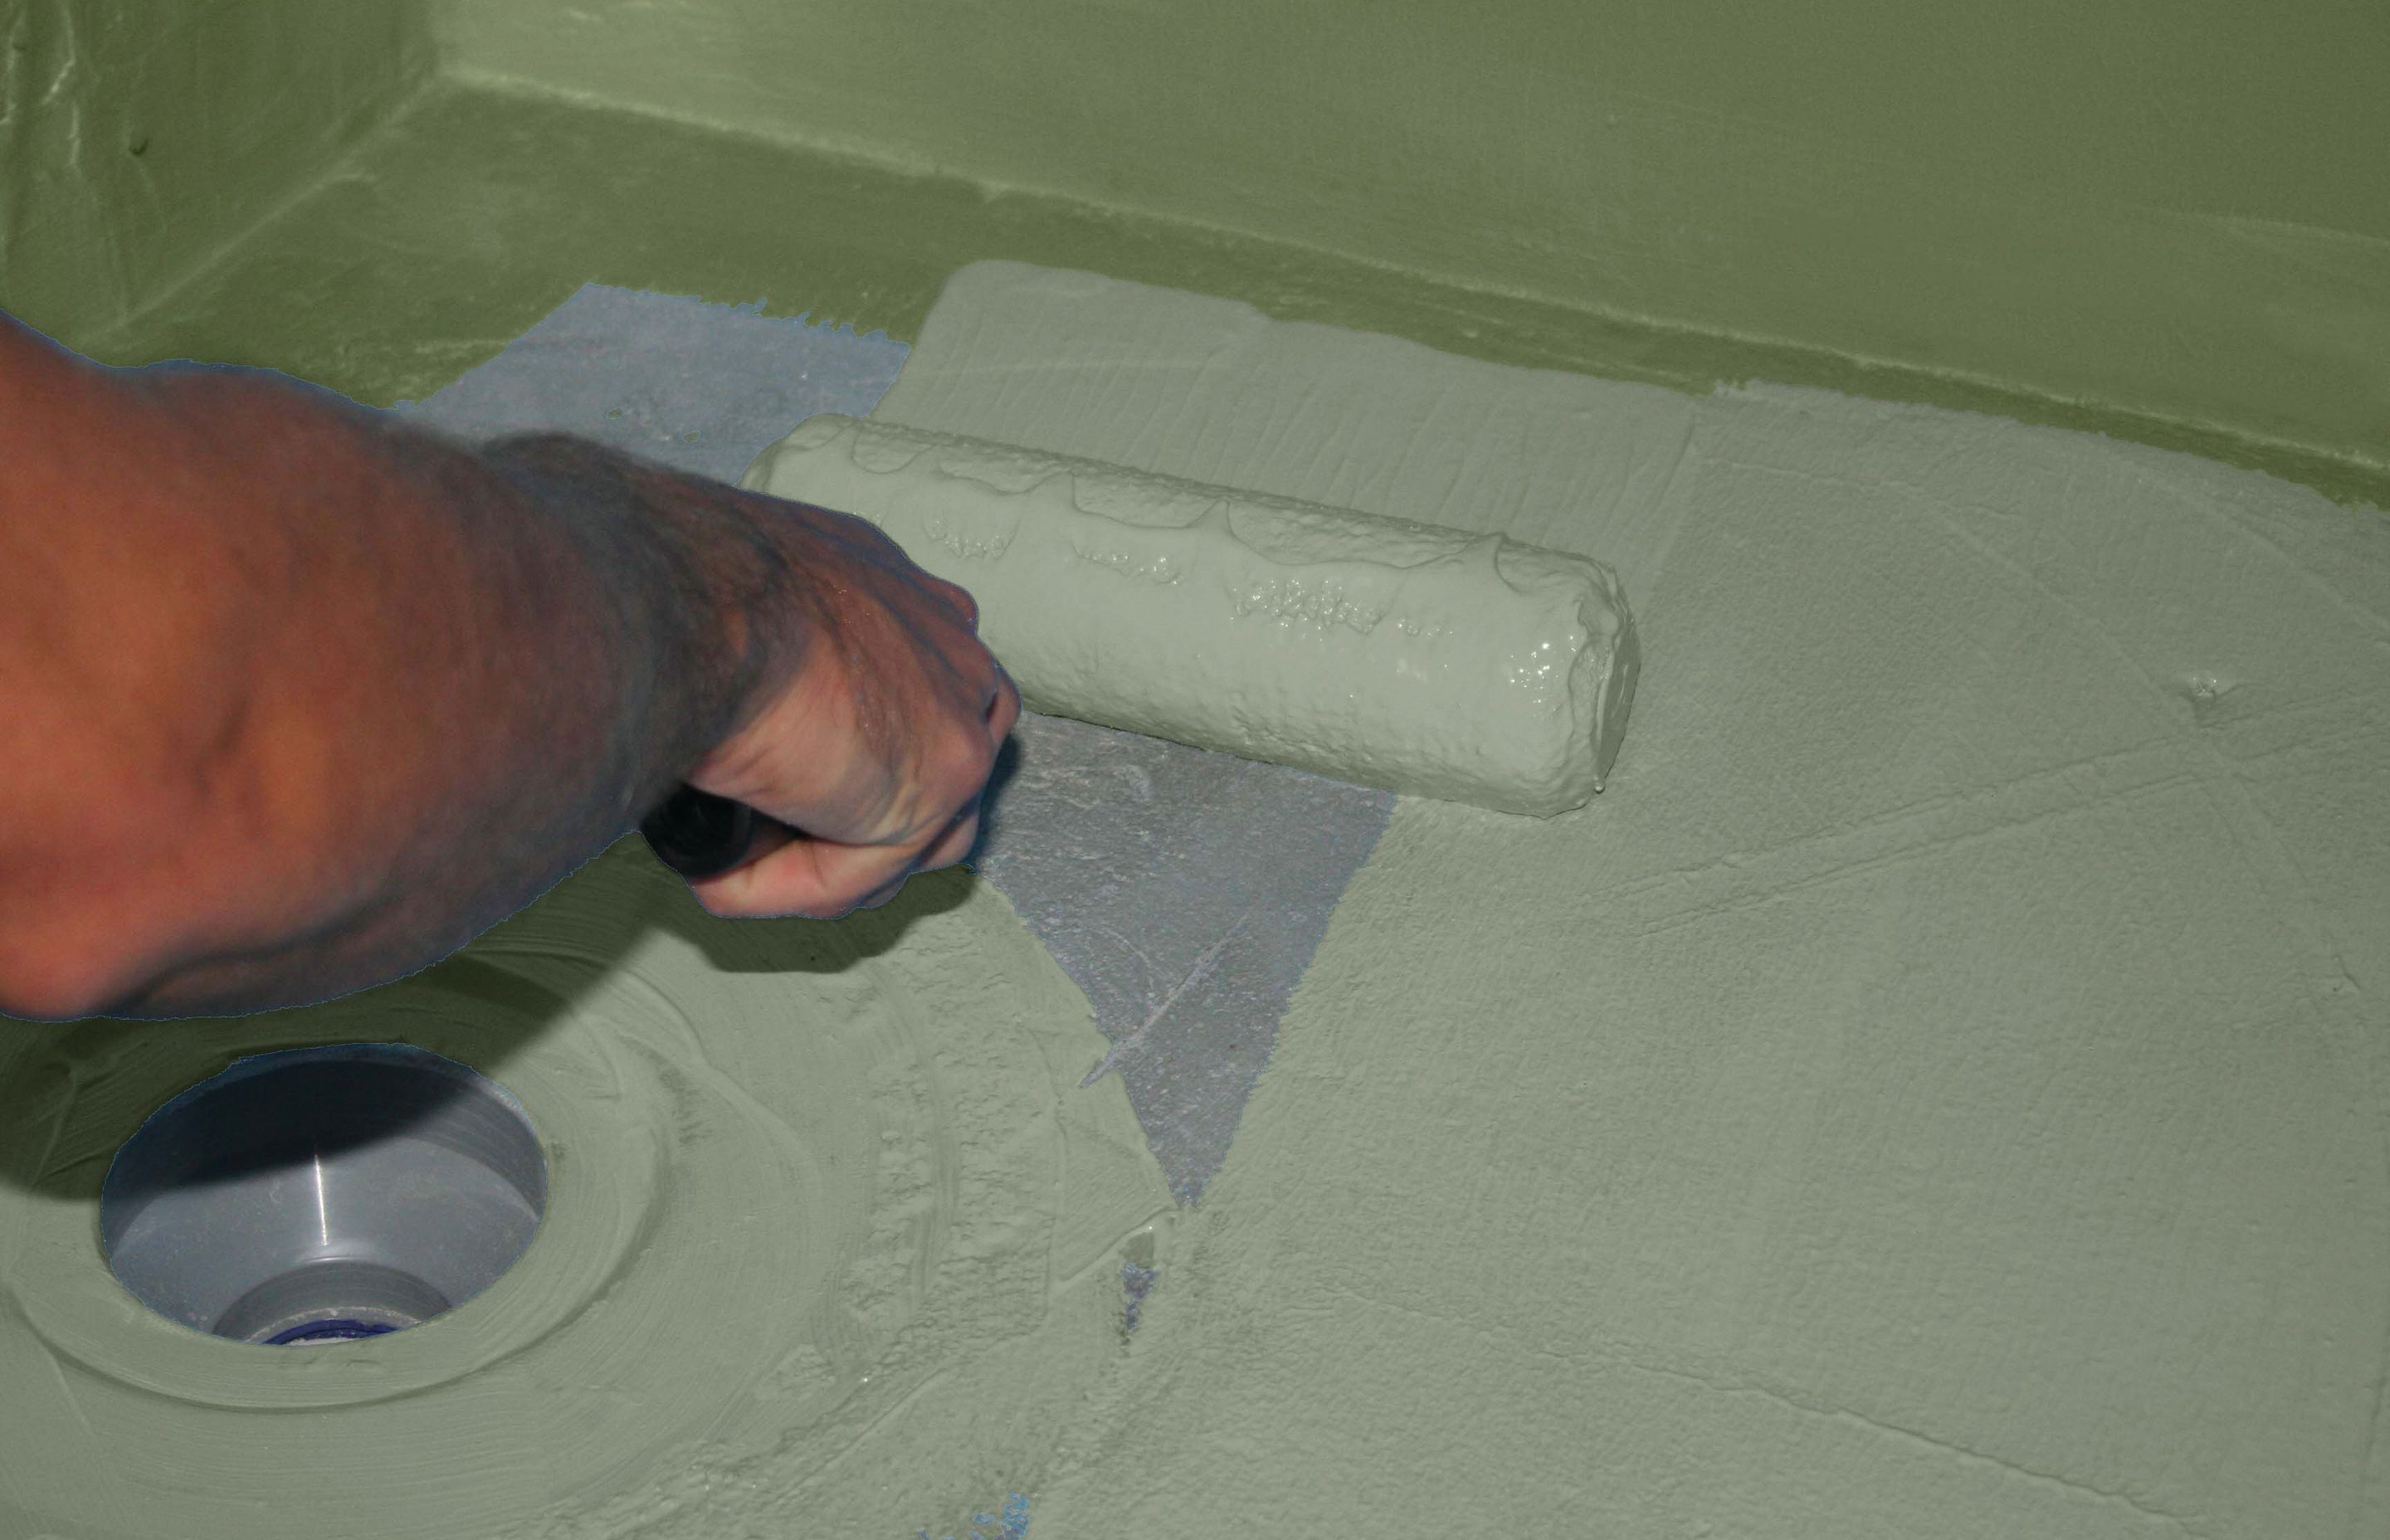 LATICRETE under-tile waterproofing membranes provide protection for floors and walls for applications ranging from bathrooms to balconies and continuous water submersion such as swimming pools.